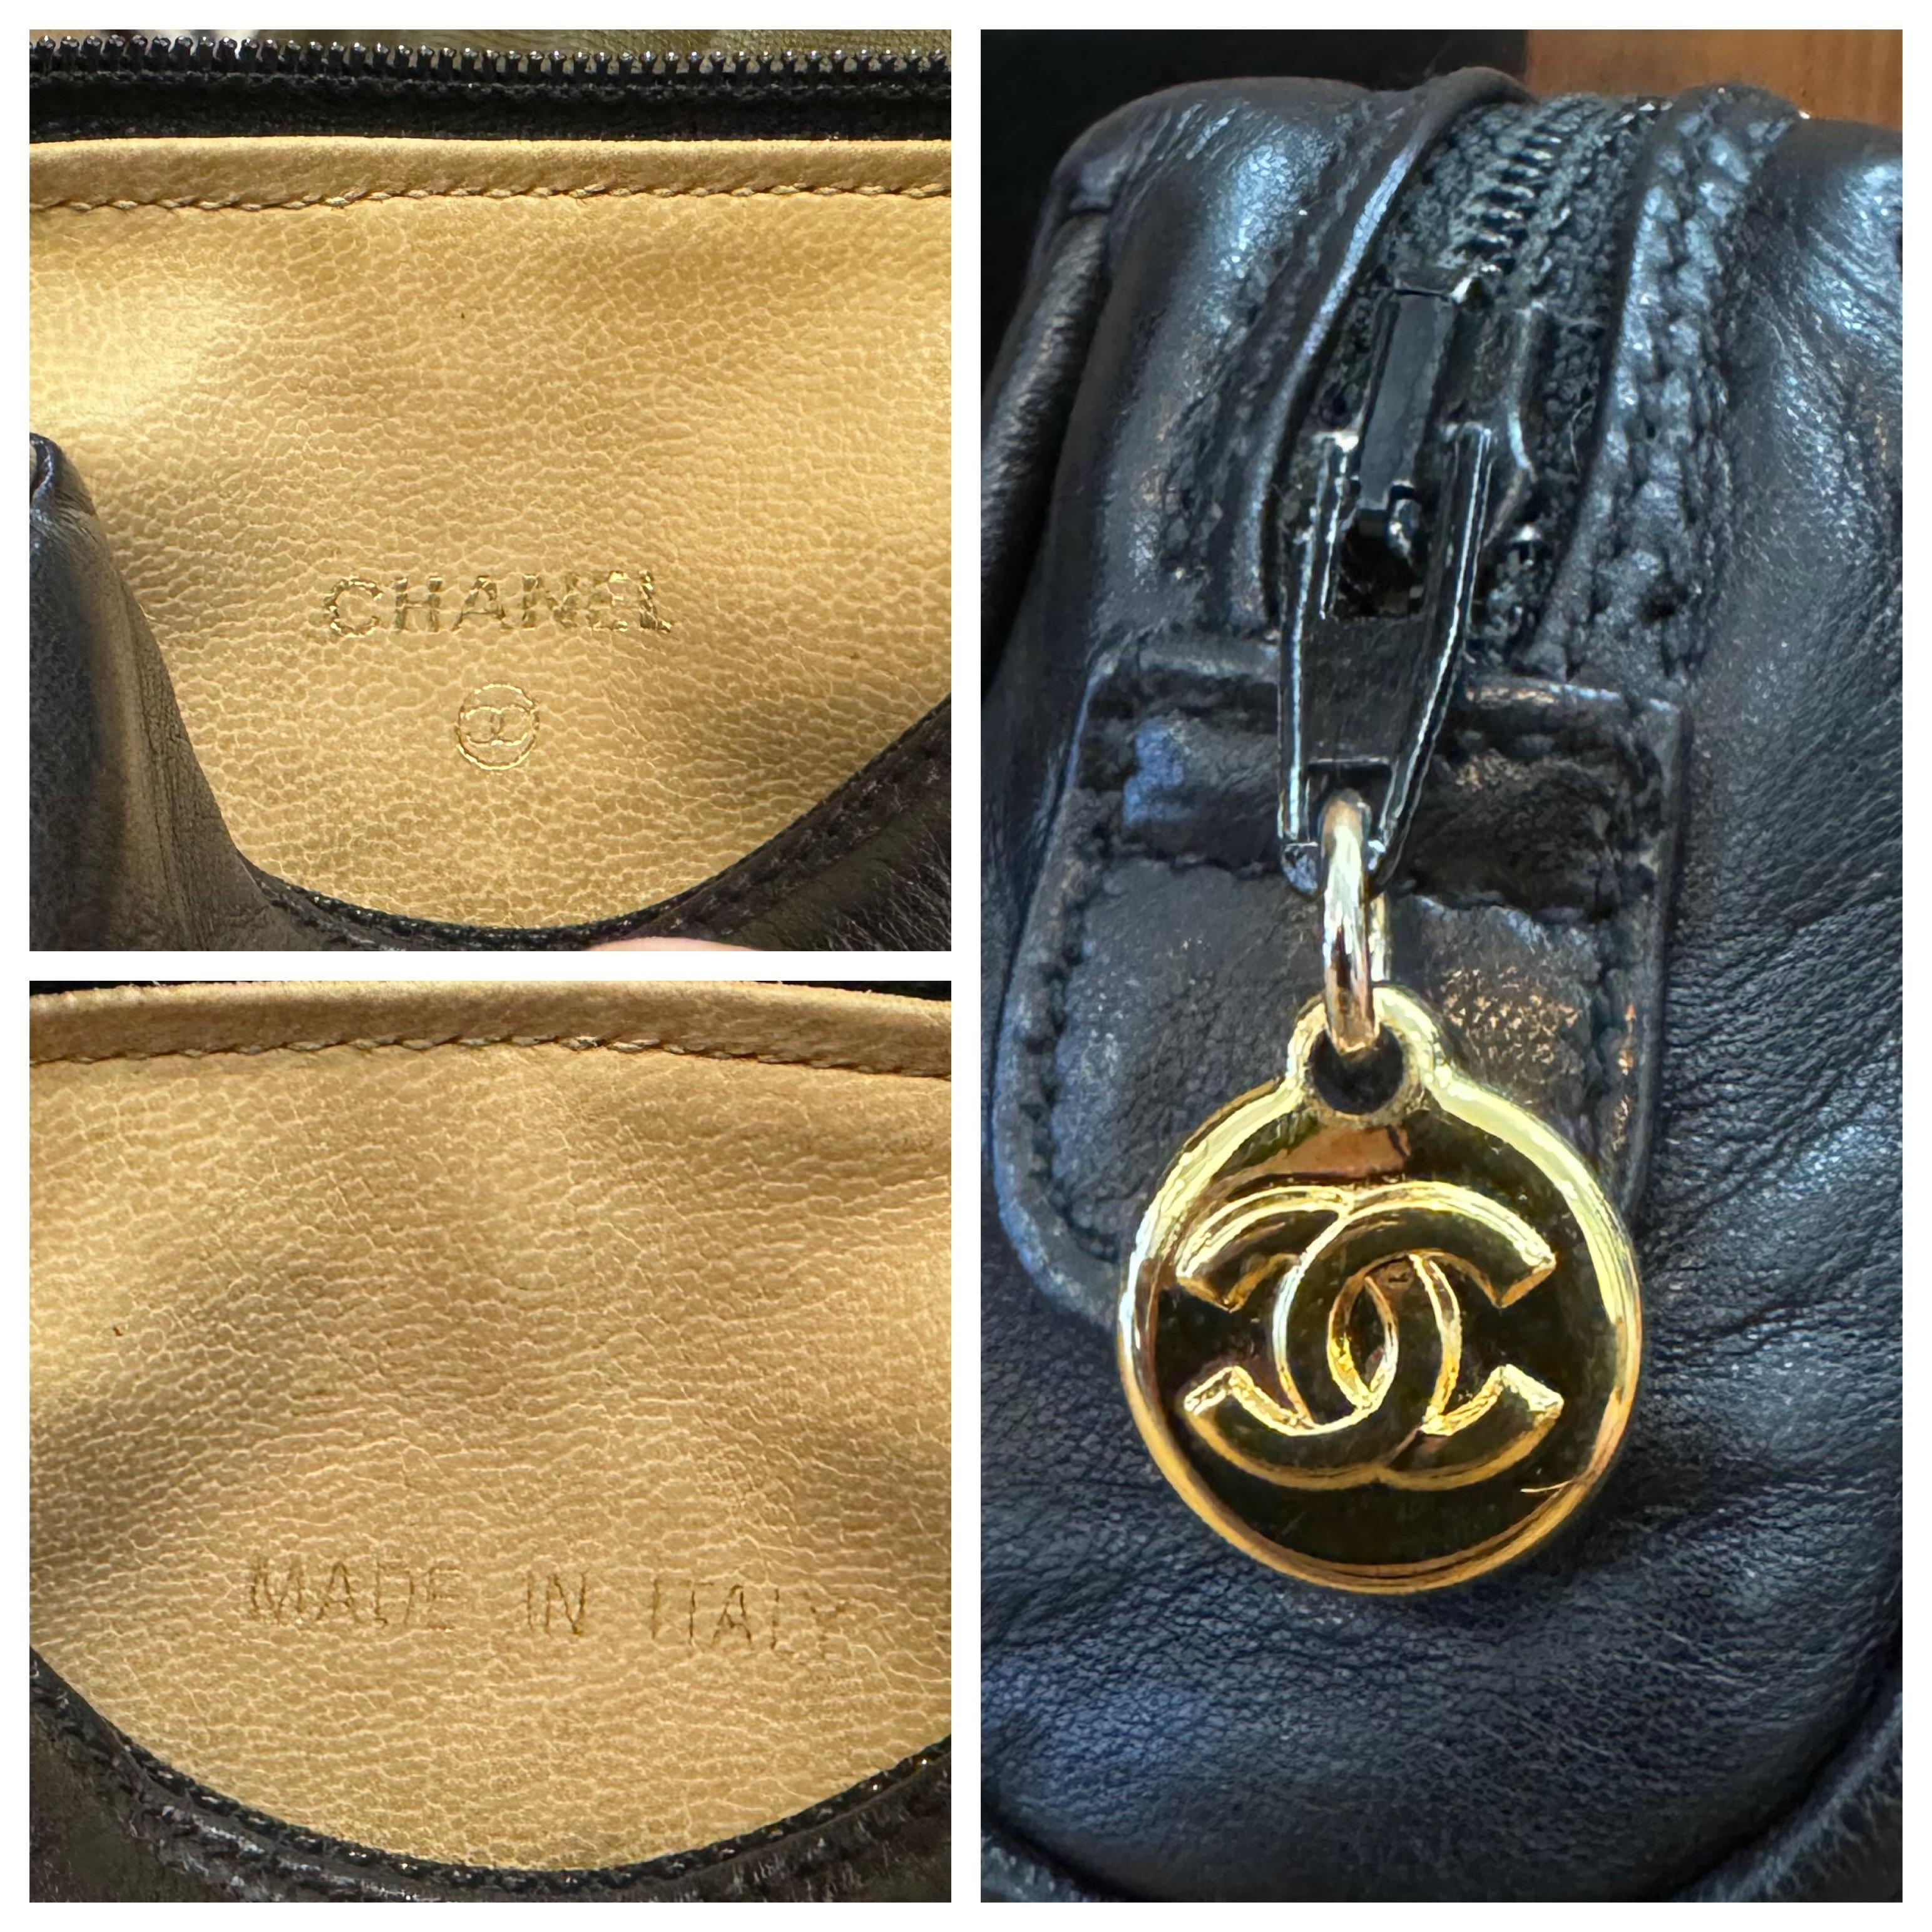 1996 Vintage CHANEL Mini Calfskin Leather Lipstick Coin Pouch Black For Sale 2